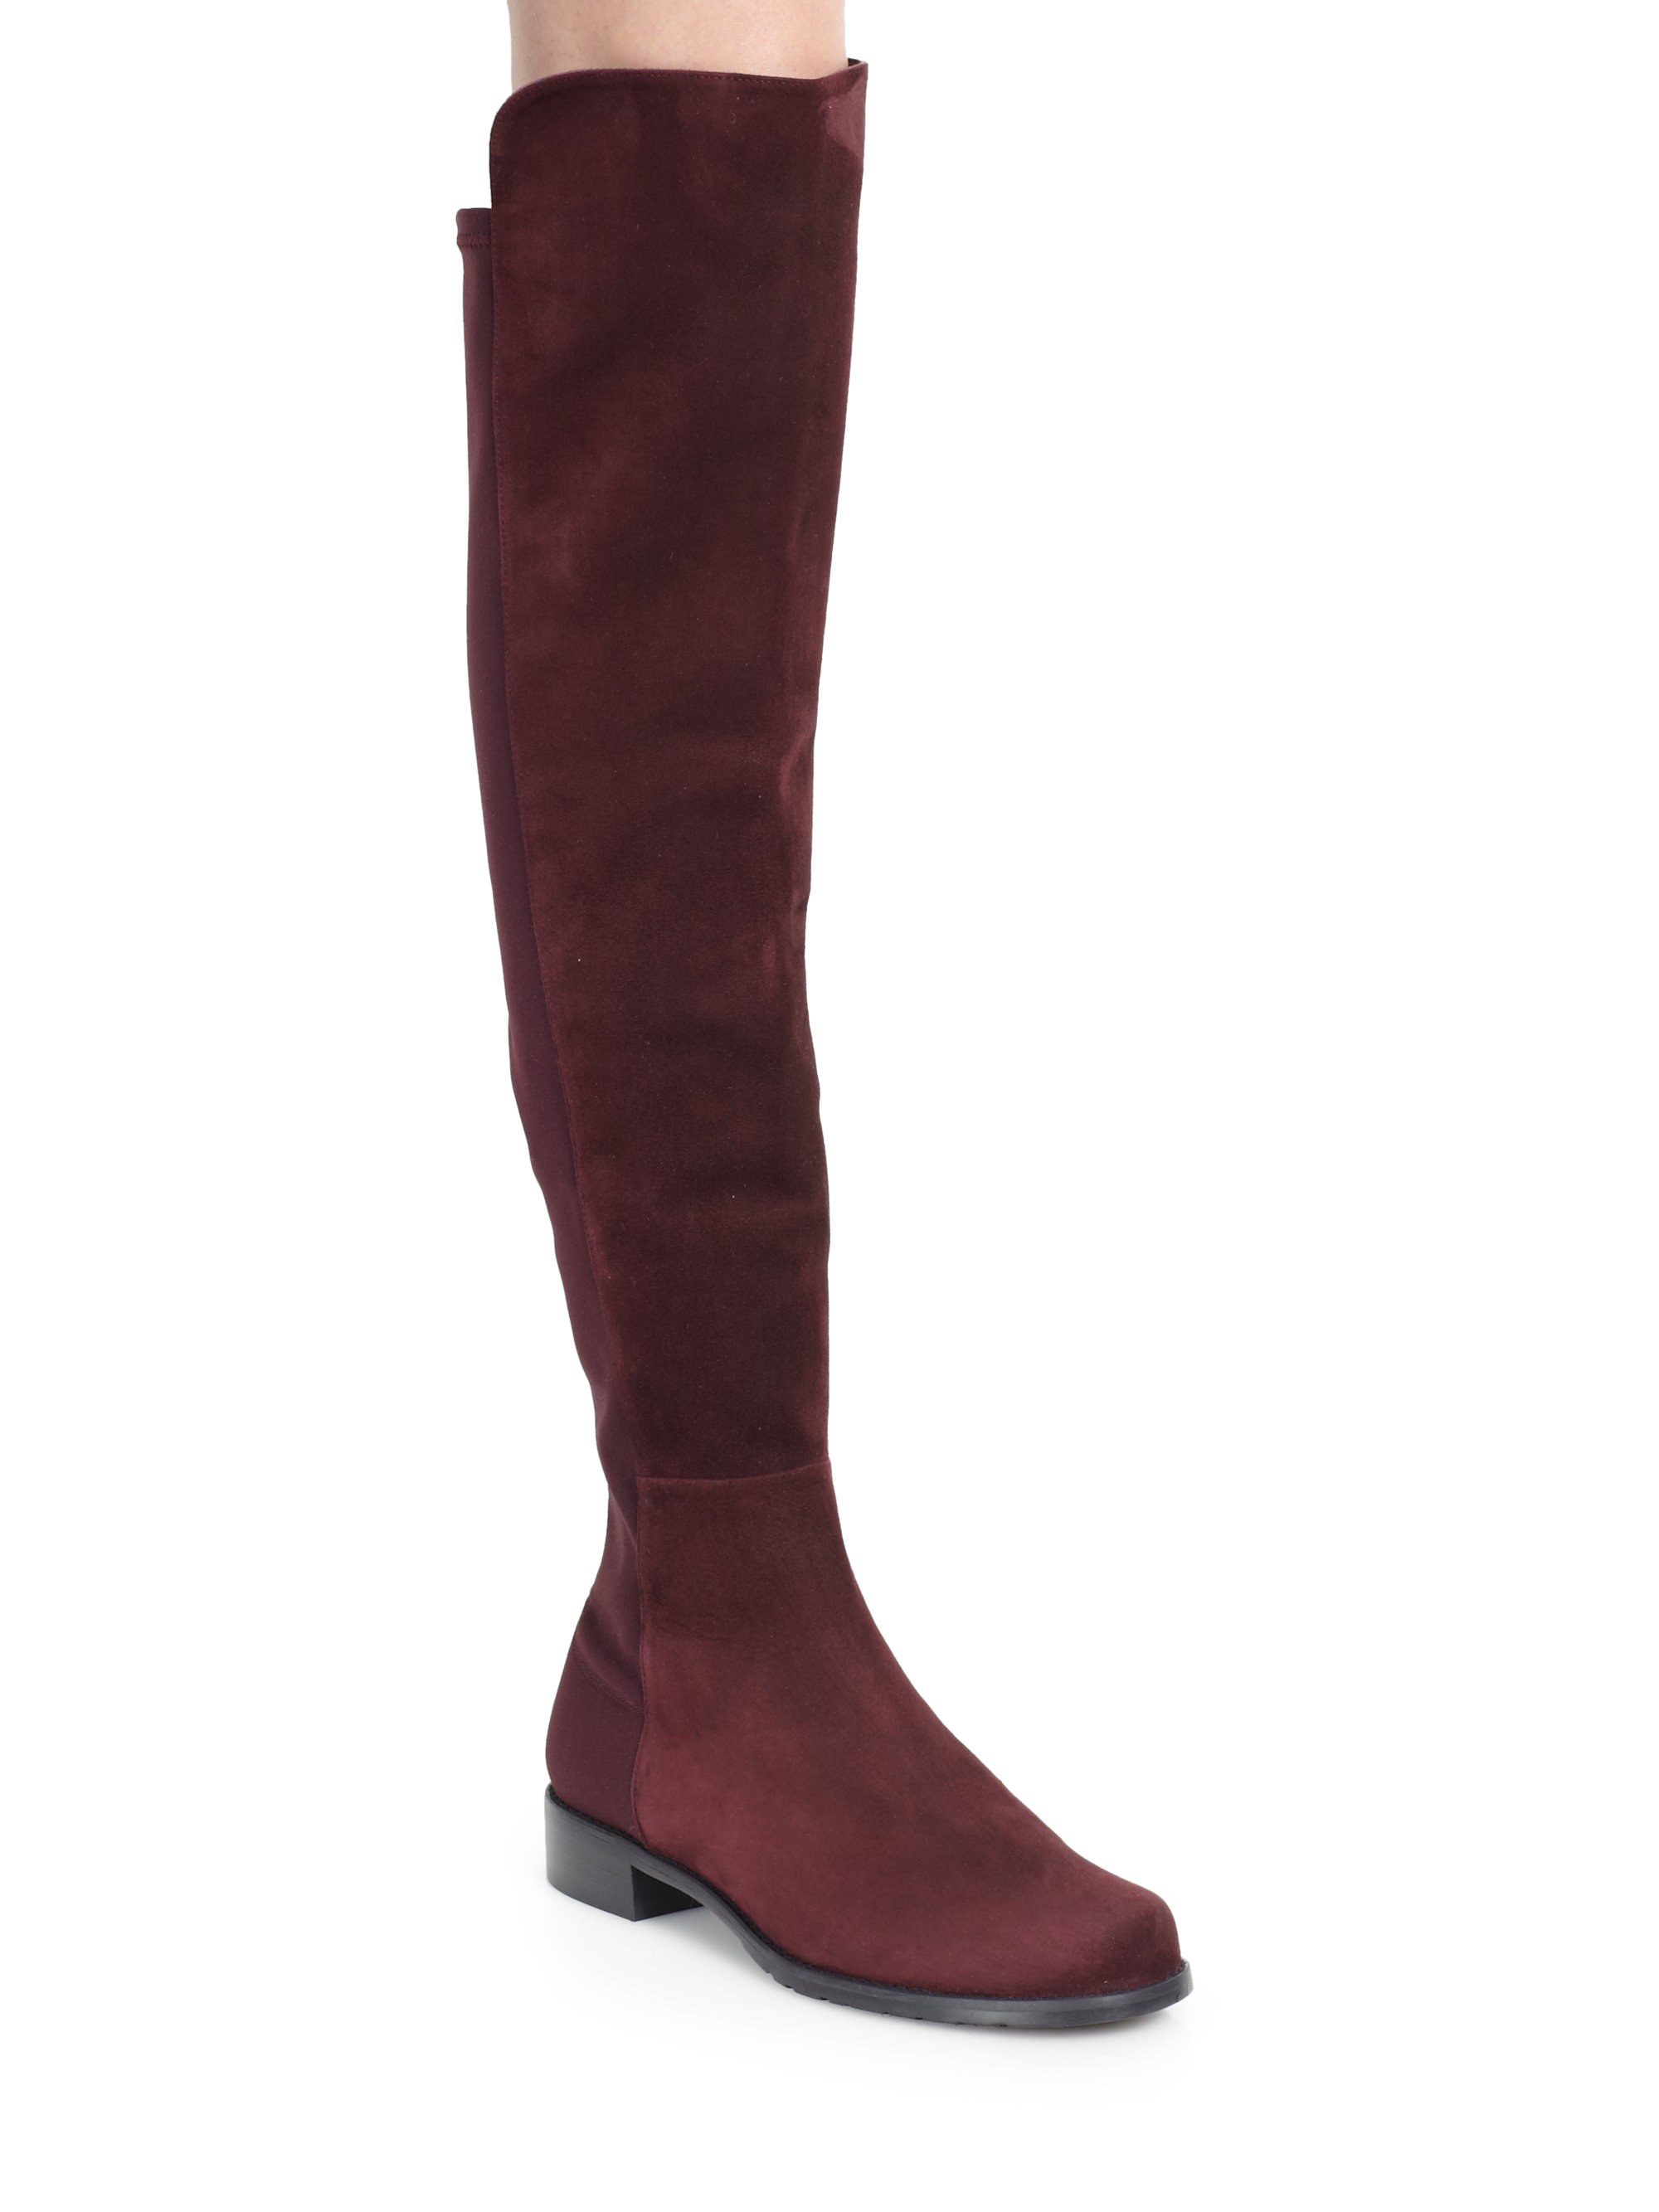 Stuart weitzman 5050 Suede Over-the-knee Boots in Red (RED CURRANT) | Lyst